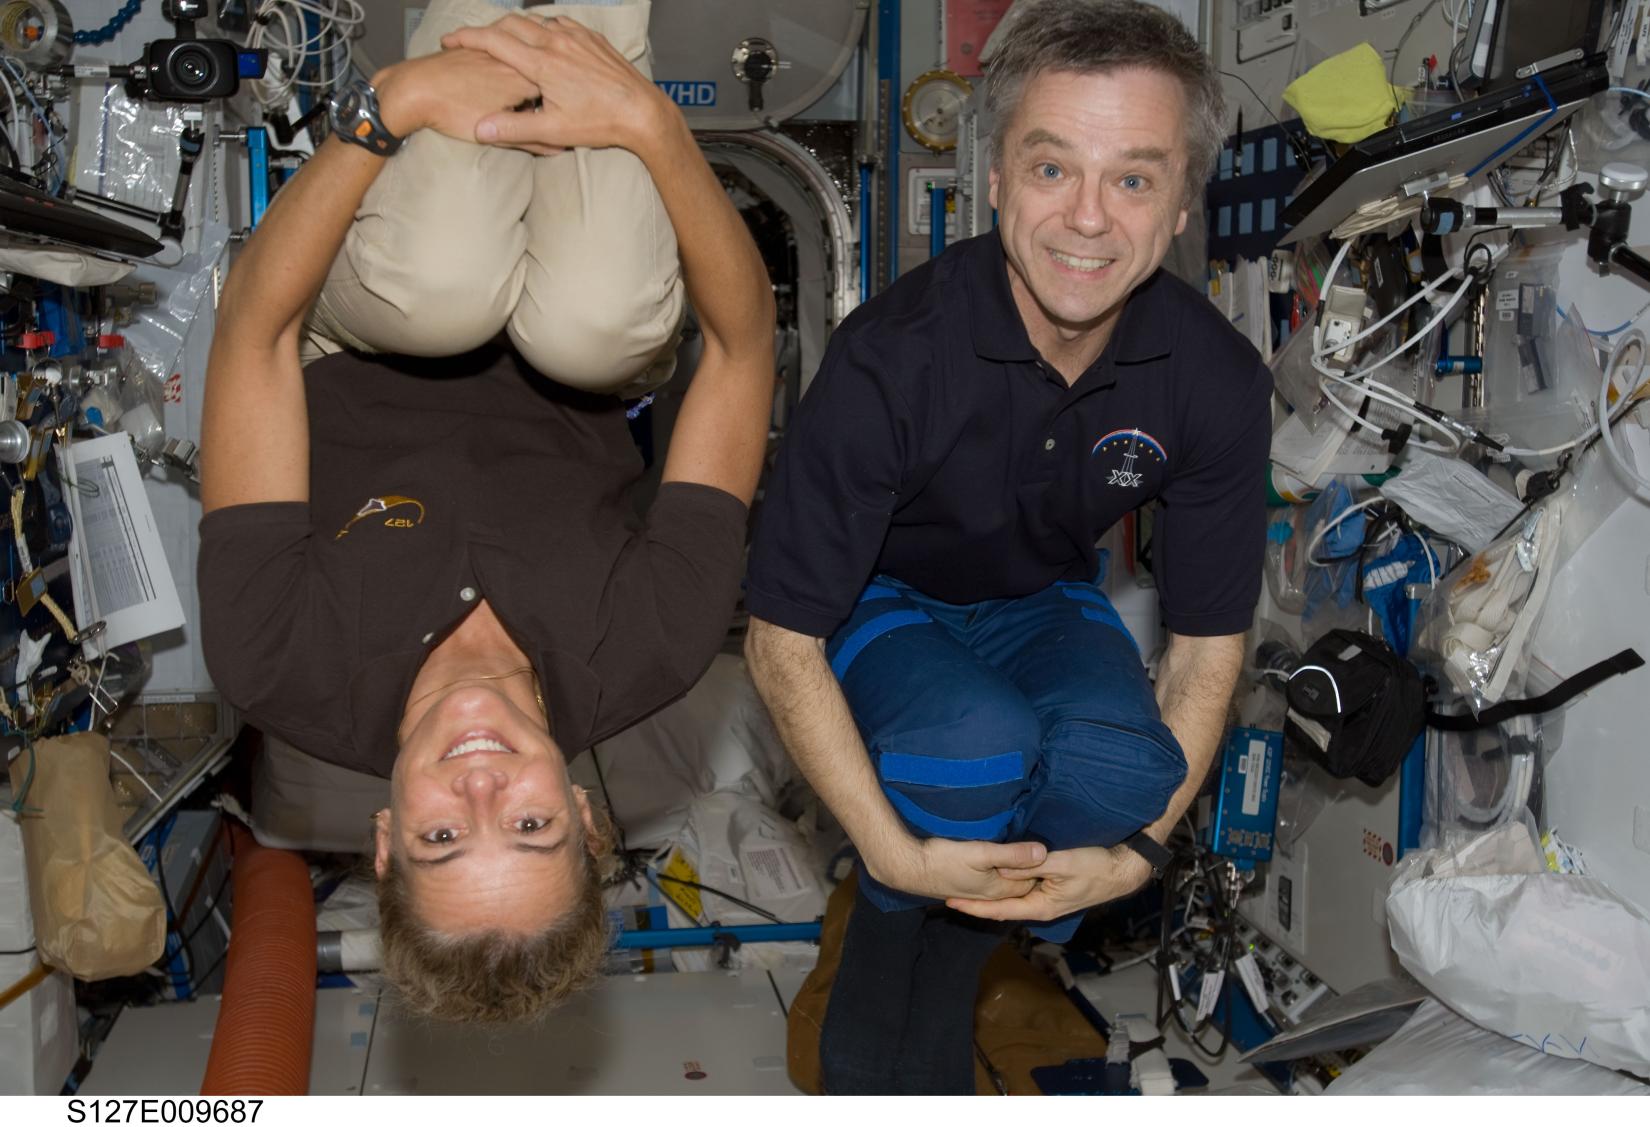 Julie Payette and Robert Thirsk in space